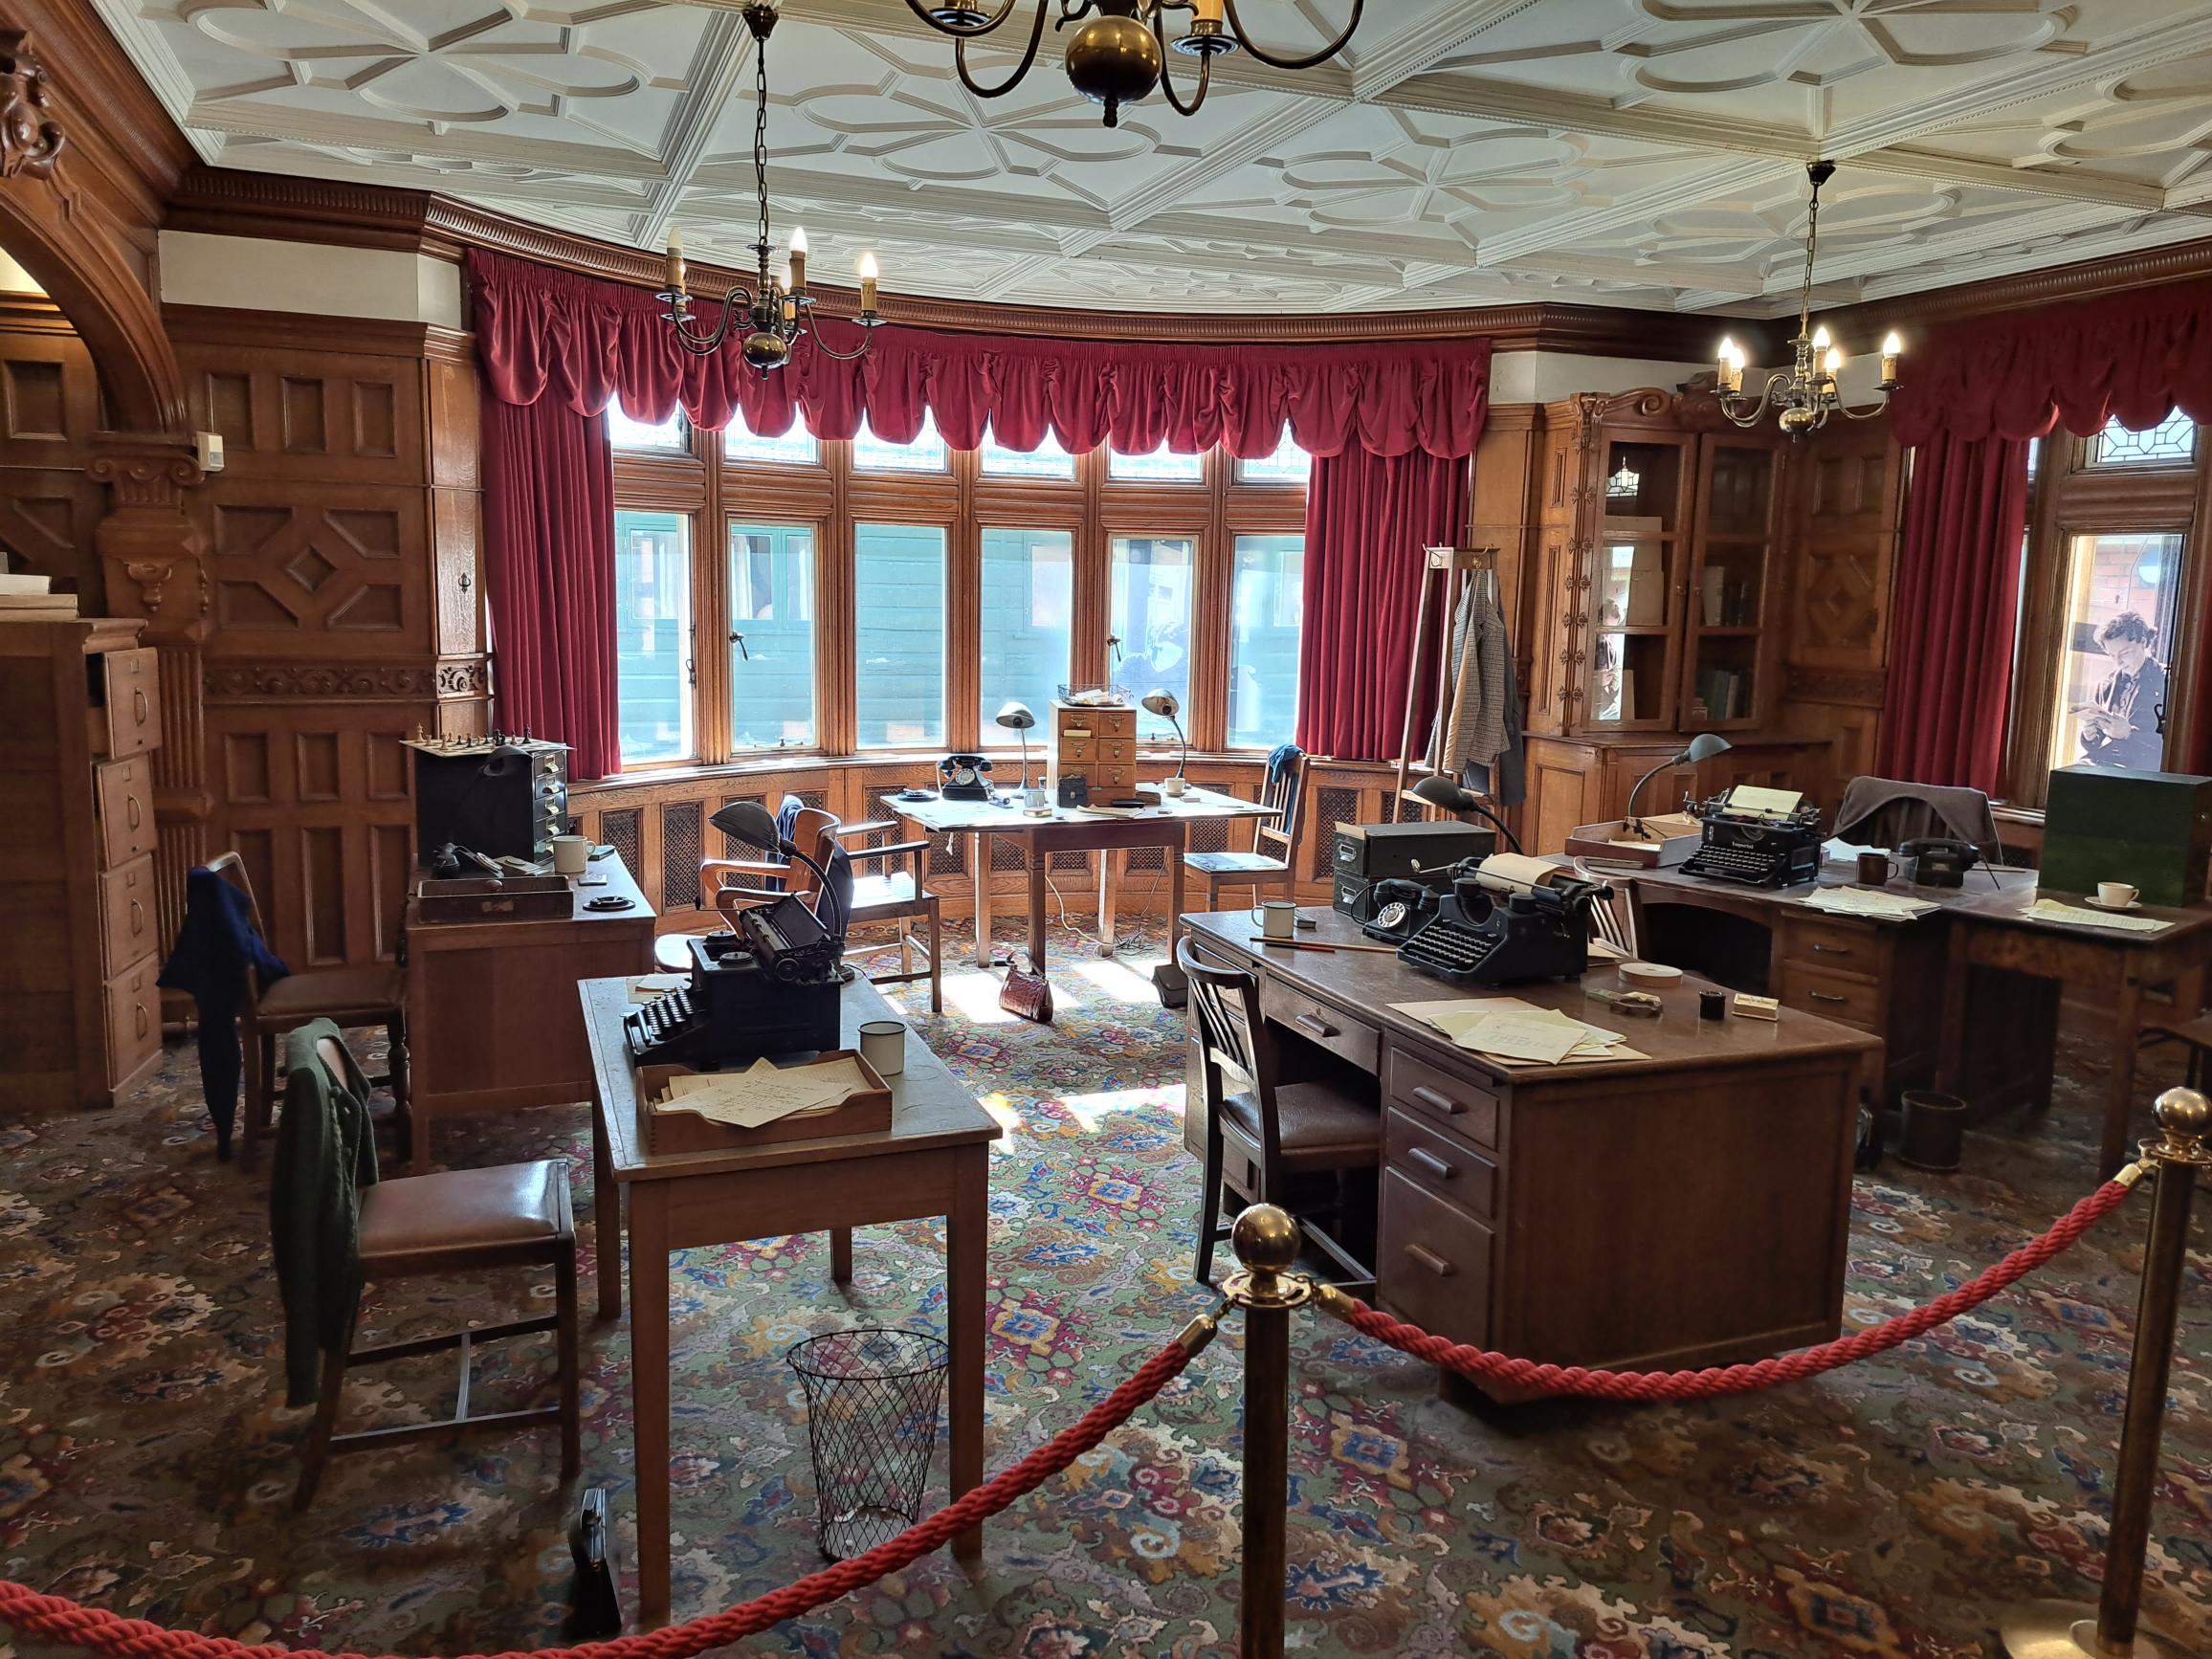 Visit to Bletchley Park (The mansion)